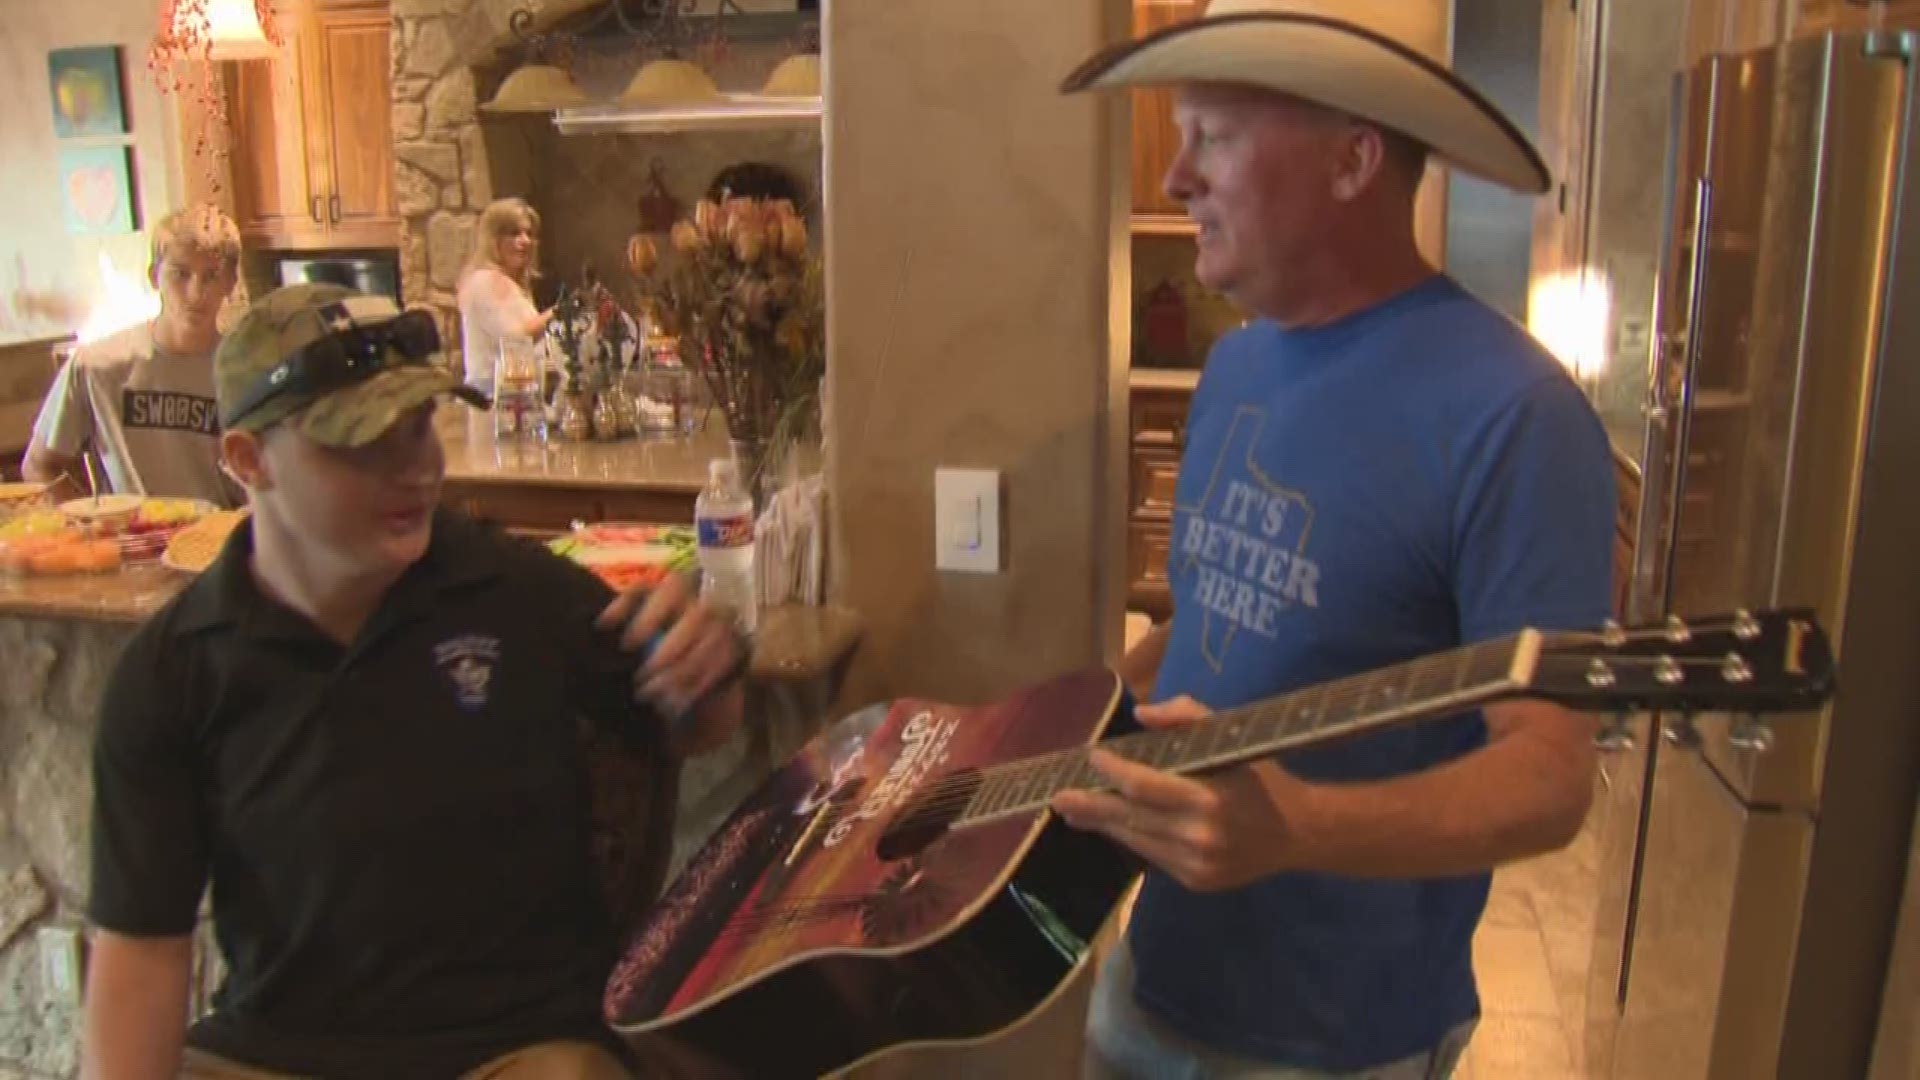 Texas Country music star Kevin Fowler greeted a very special fan in Williamson county Thursday night.